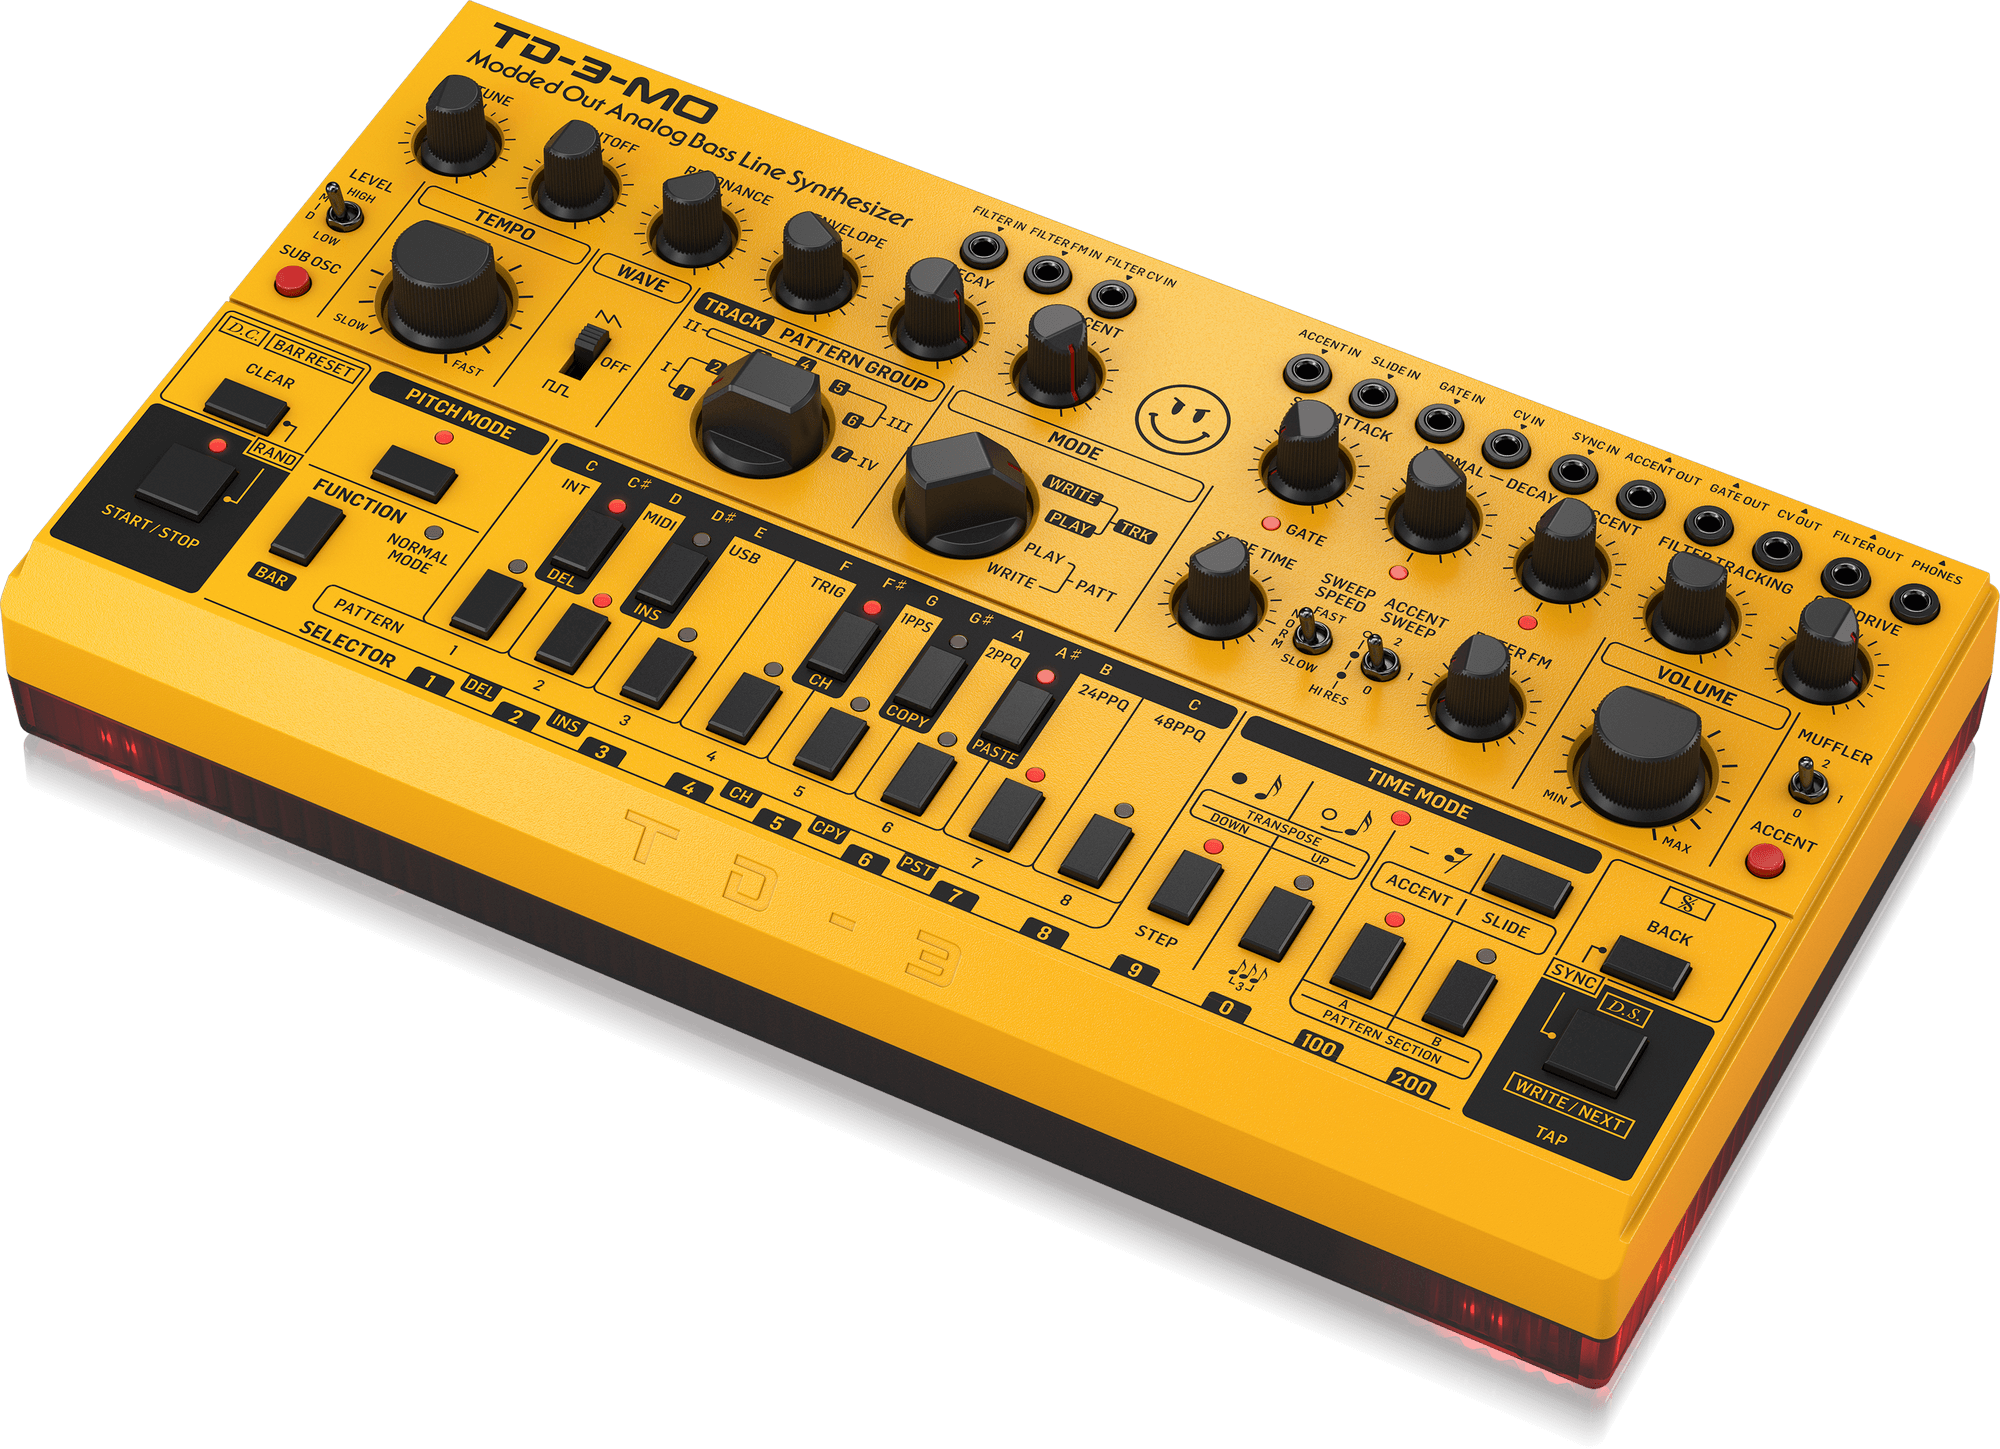 Behringer | Product | TD-3-MO-AM